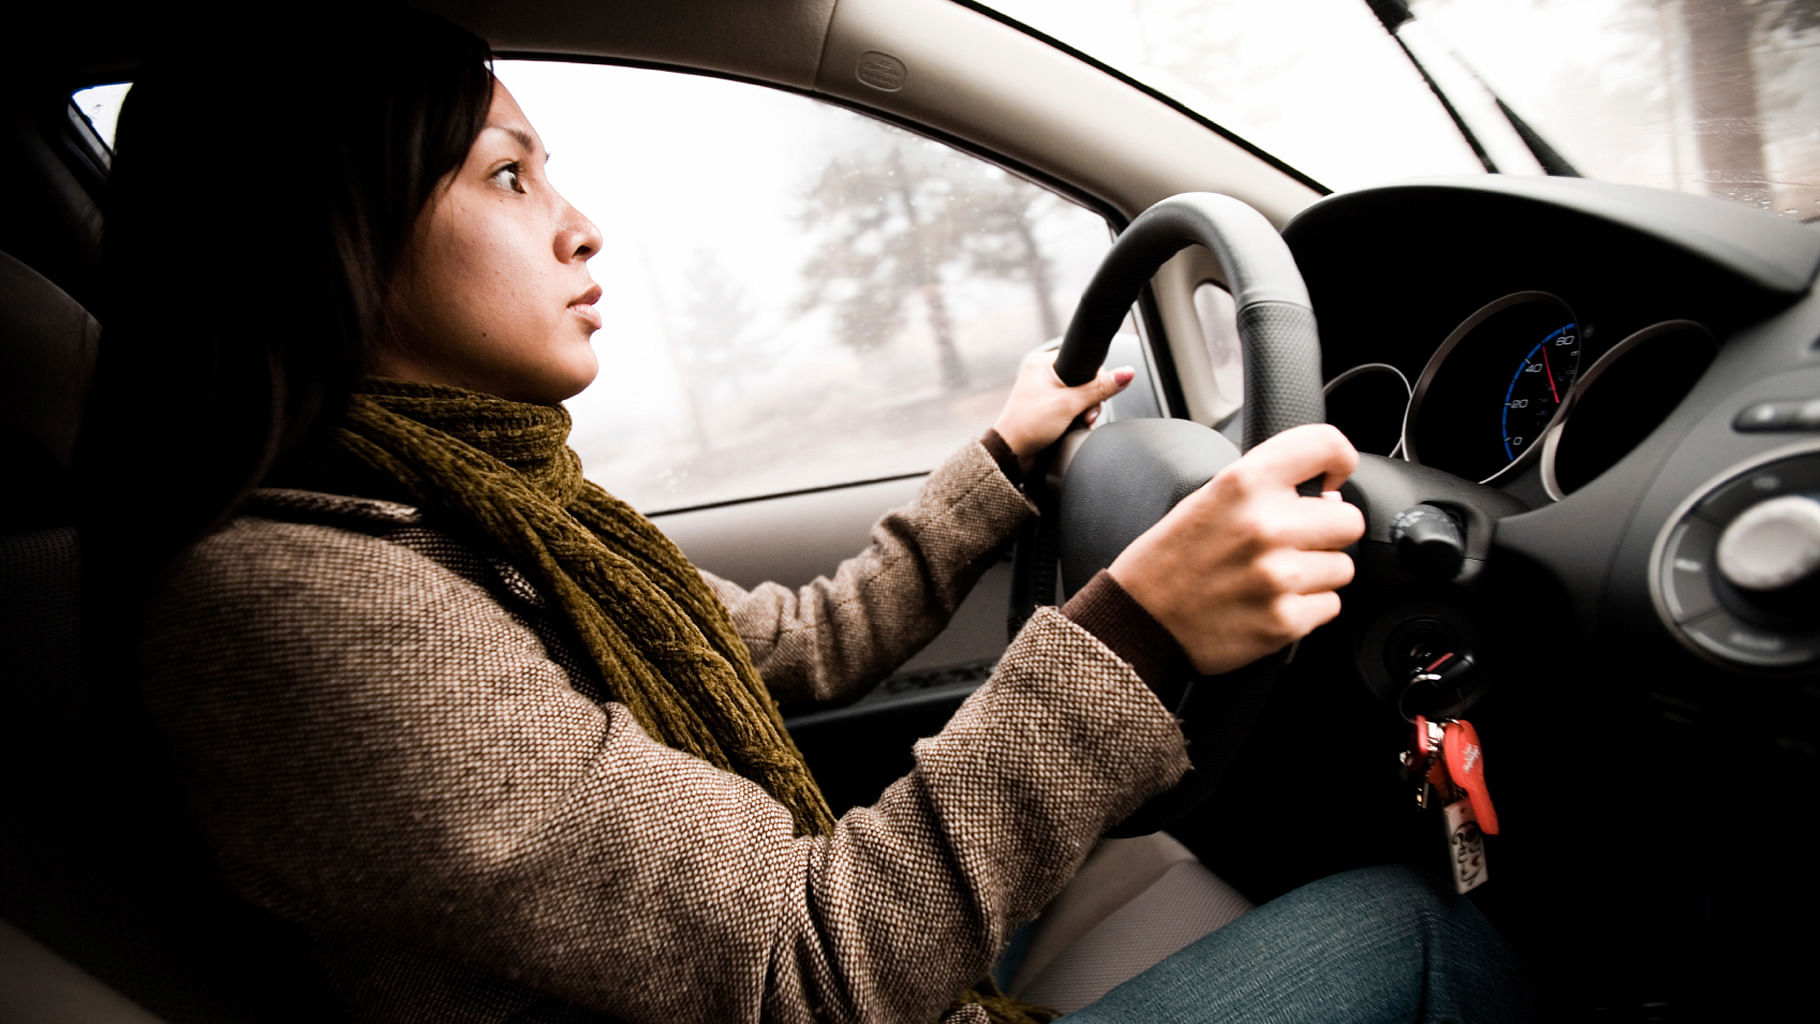 Women are currently exempted from the odd-even rule. (Photo: iStockphoto) 